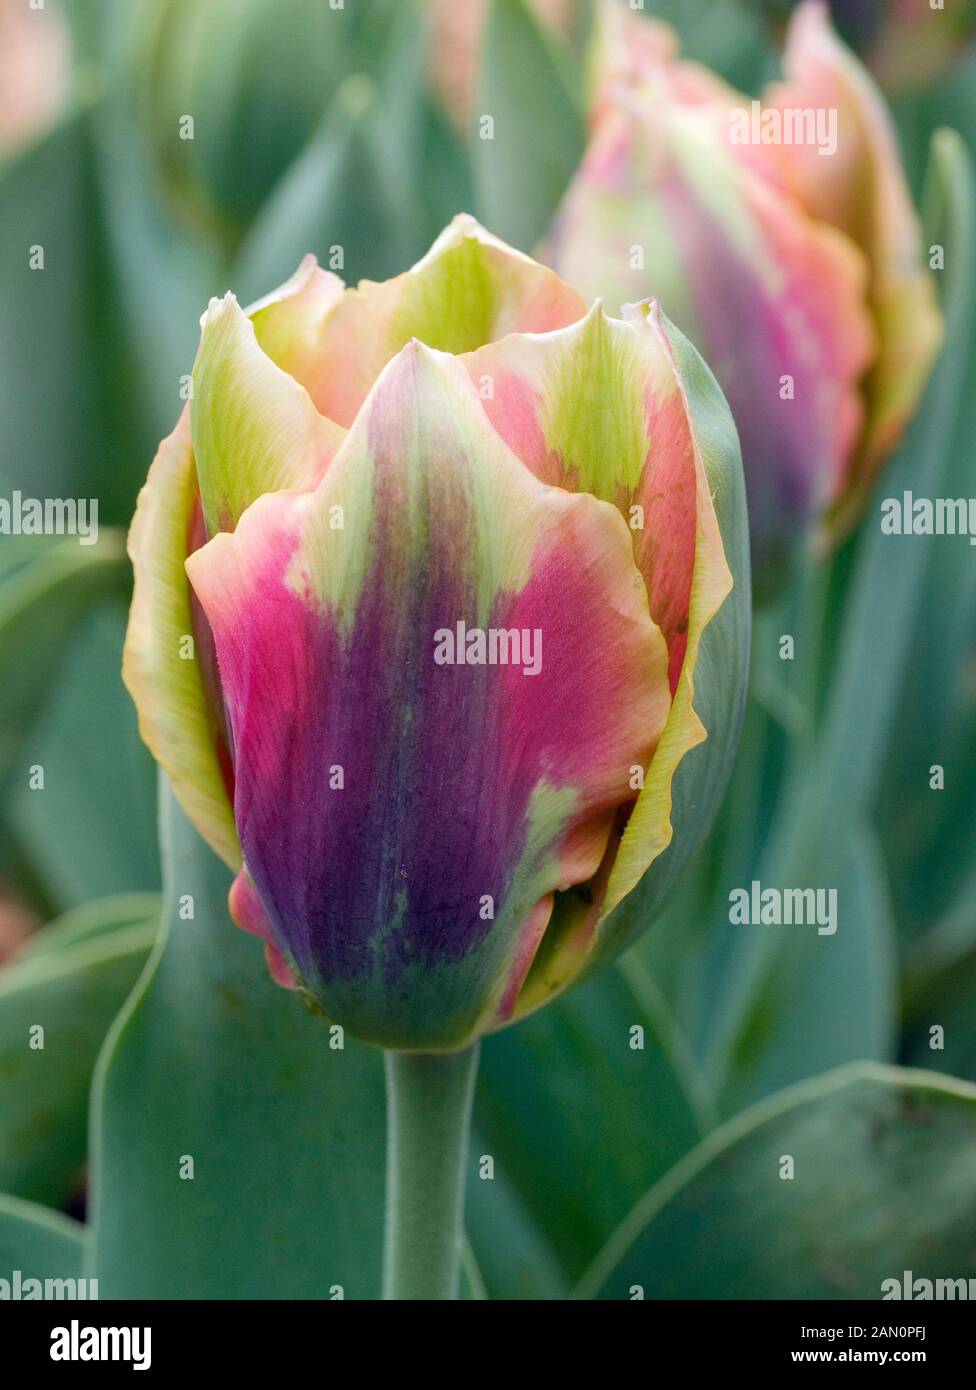 Tulipa Artist High Resolution Stock Photography And Images Alamy